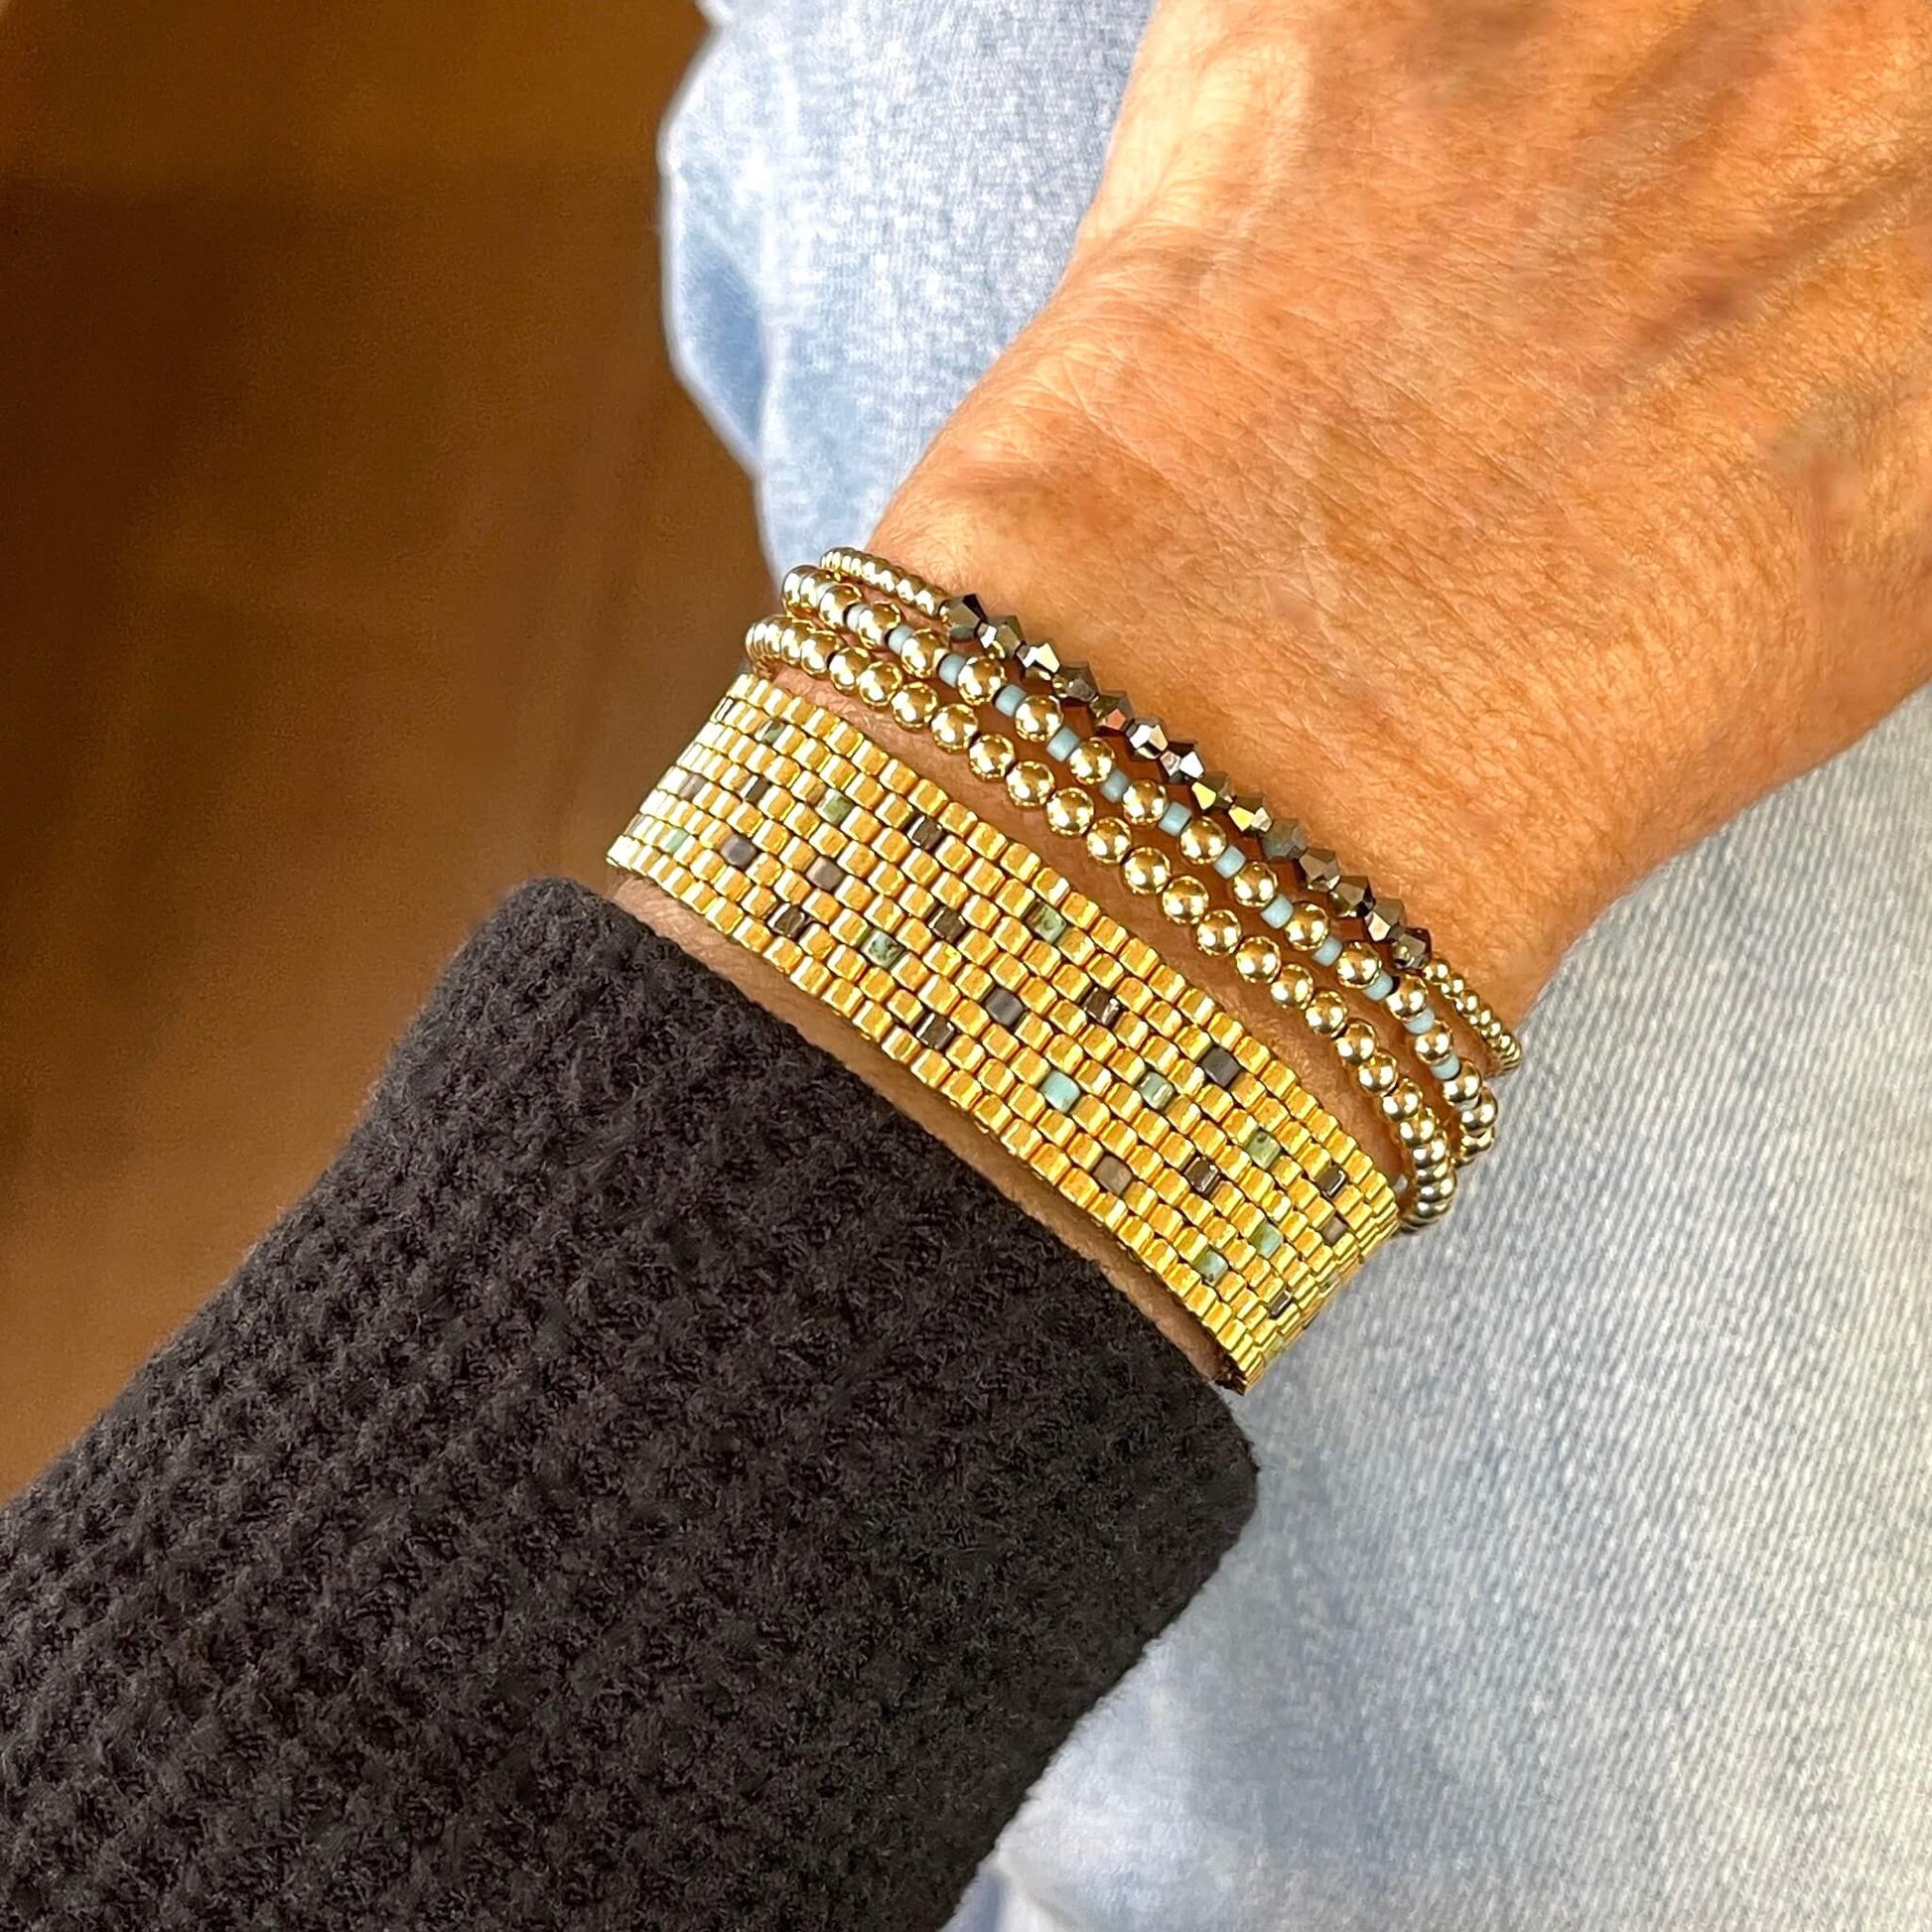 Gold beaded bracelet stack with a handwoven gold seed bead cuff and 3 gold ball stretch bracelets with crystals and seed beads on stretch cord.